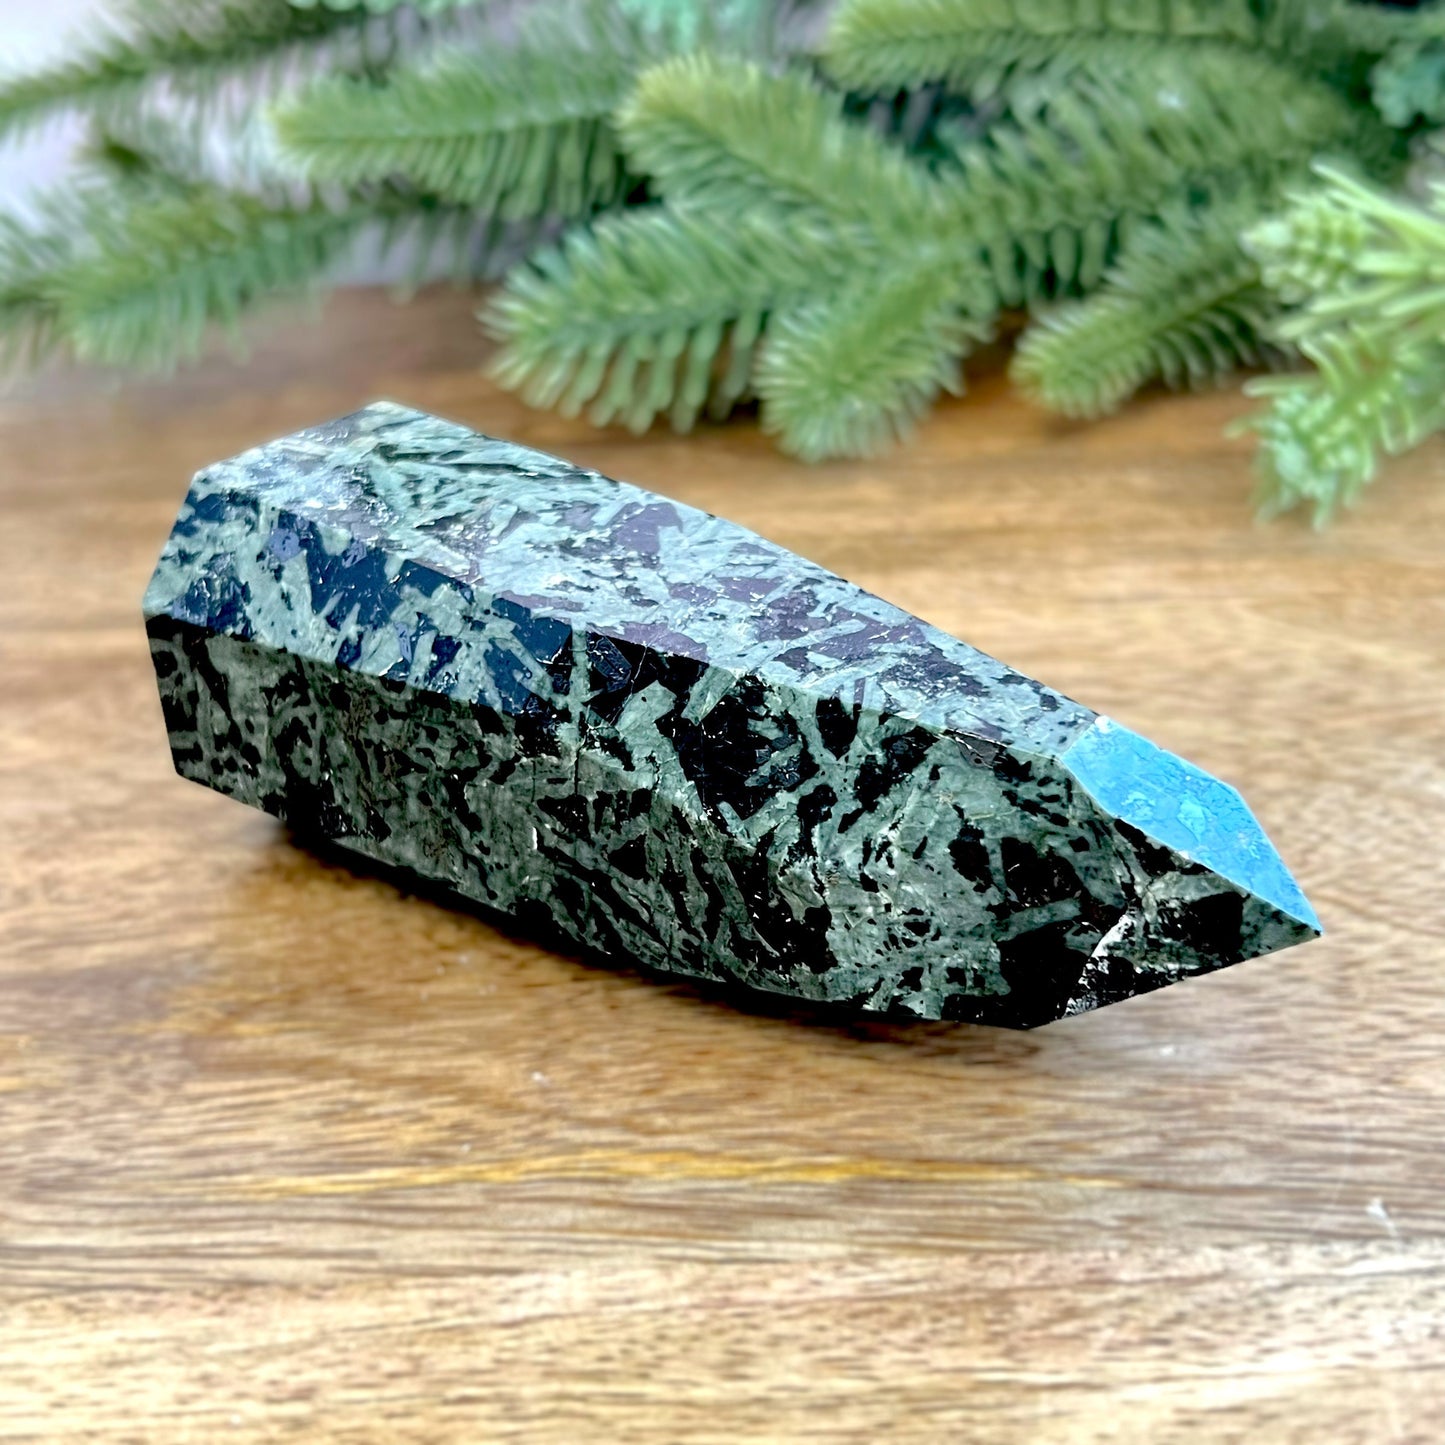 Green and Black Galaxy Jasper natural freeform carved and polished tower